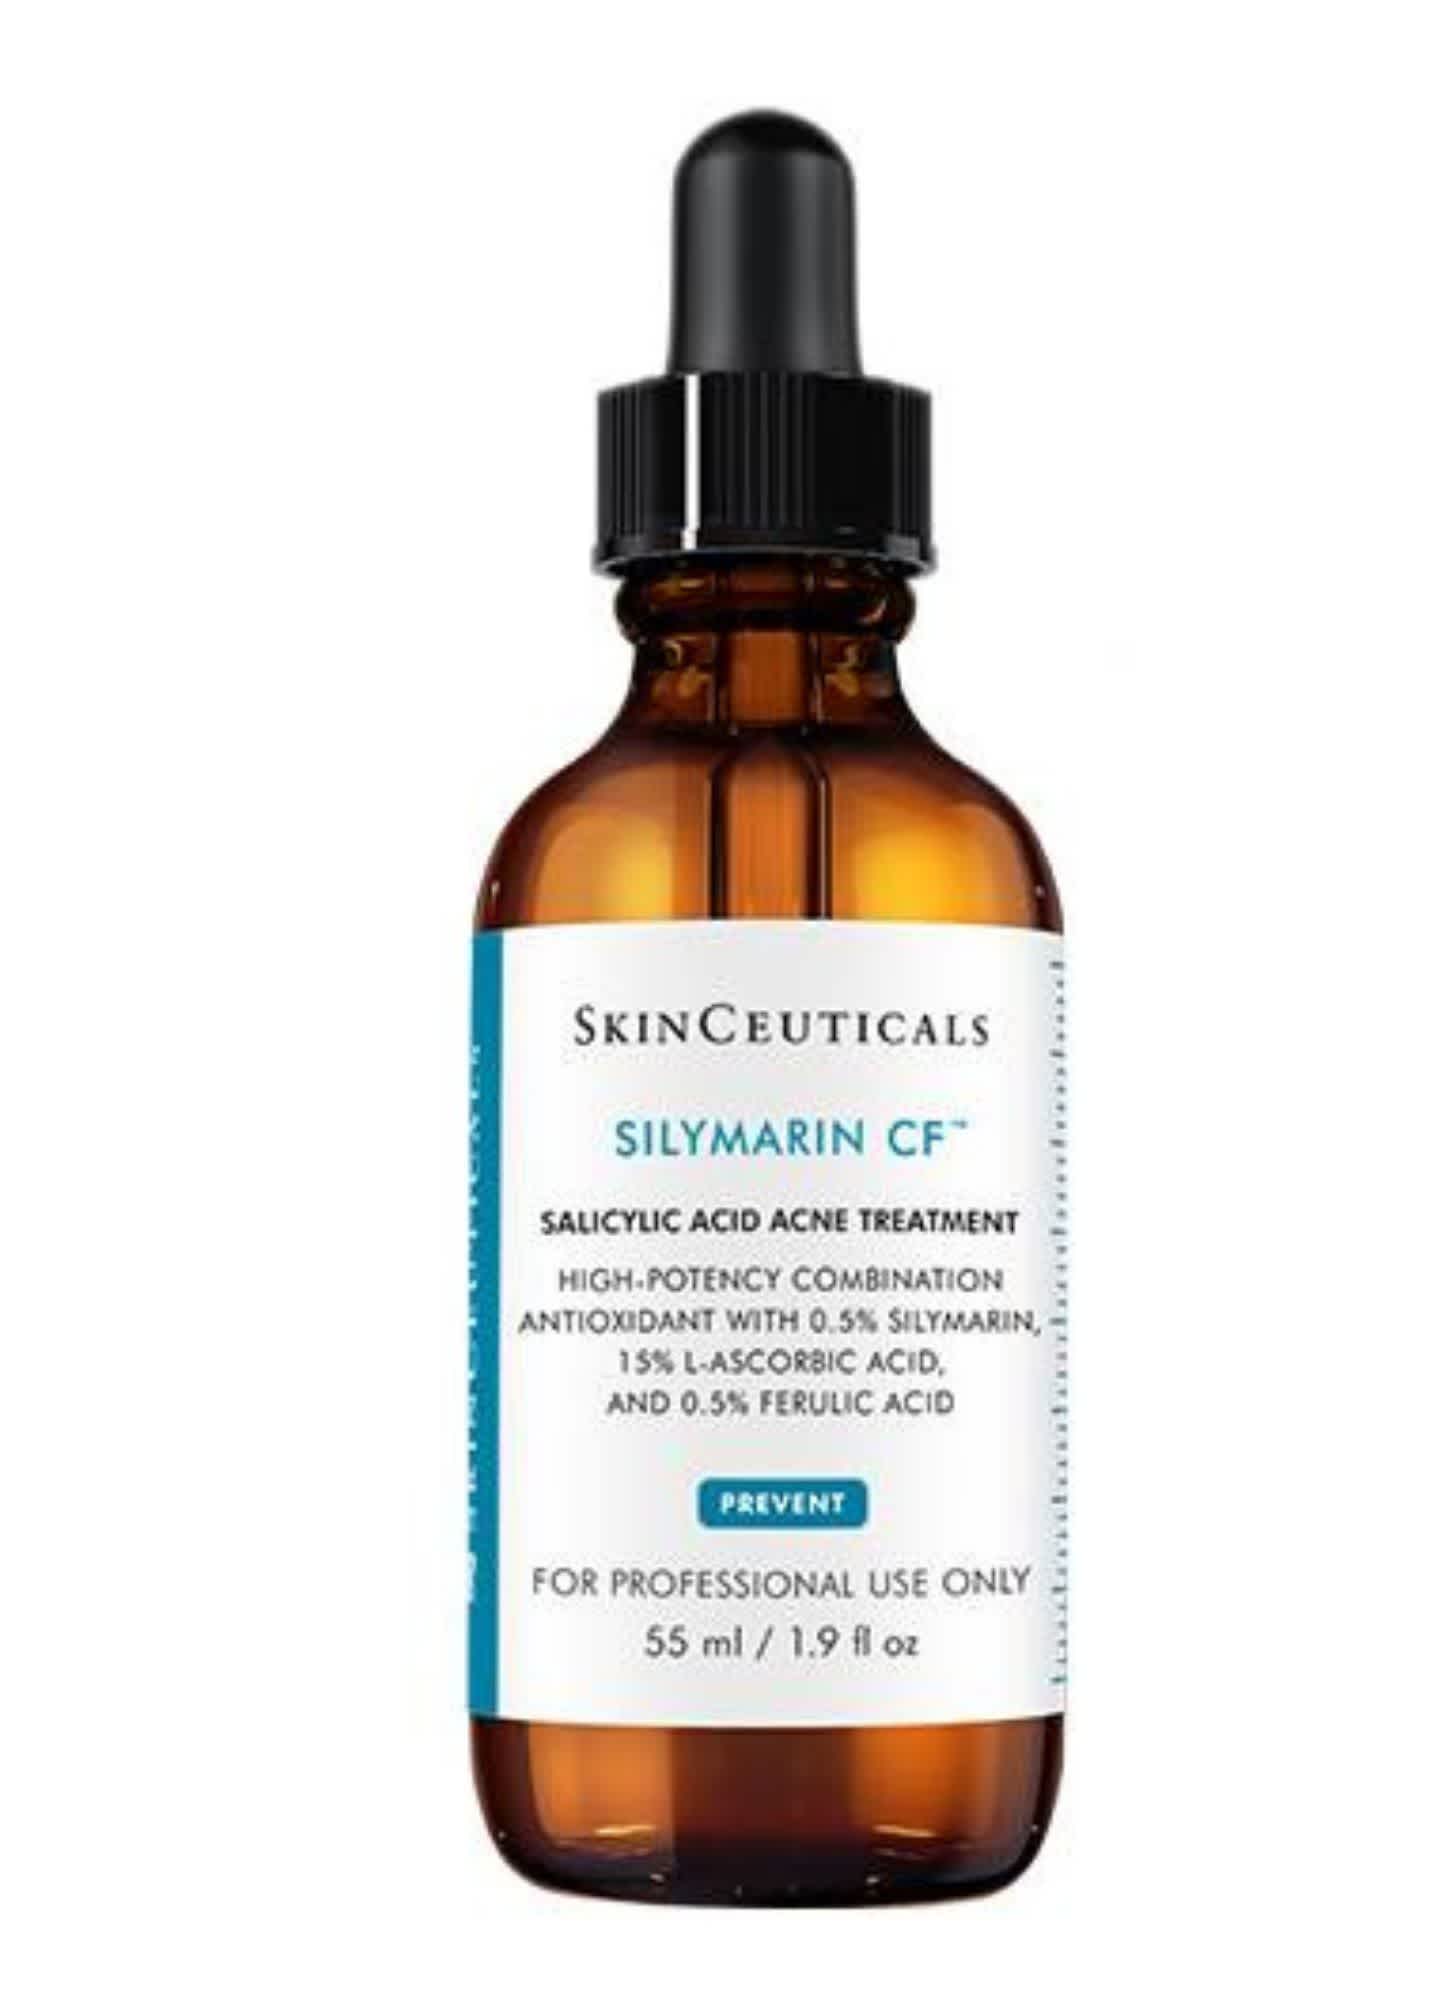 Skinceuticals, Silymarin CF, ($233) currently on 20% discount at Adore Beauty 